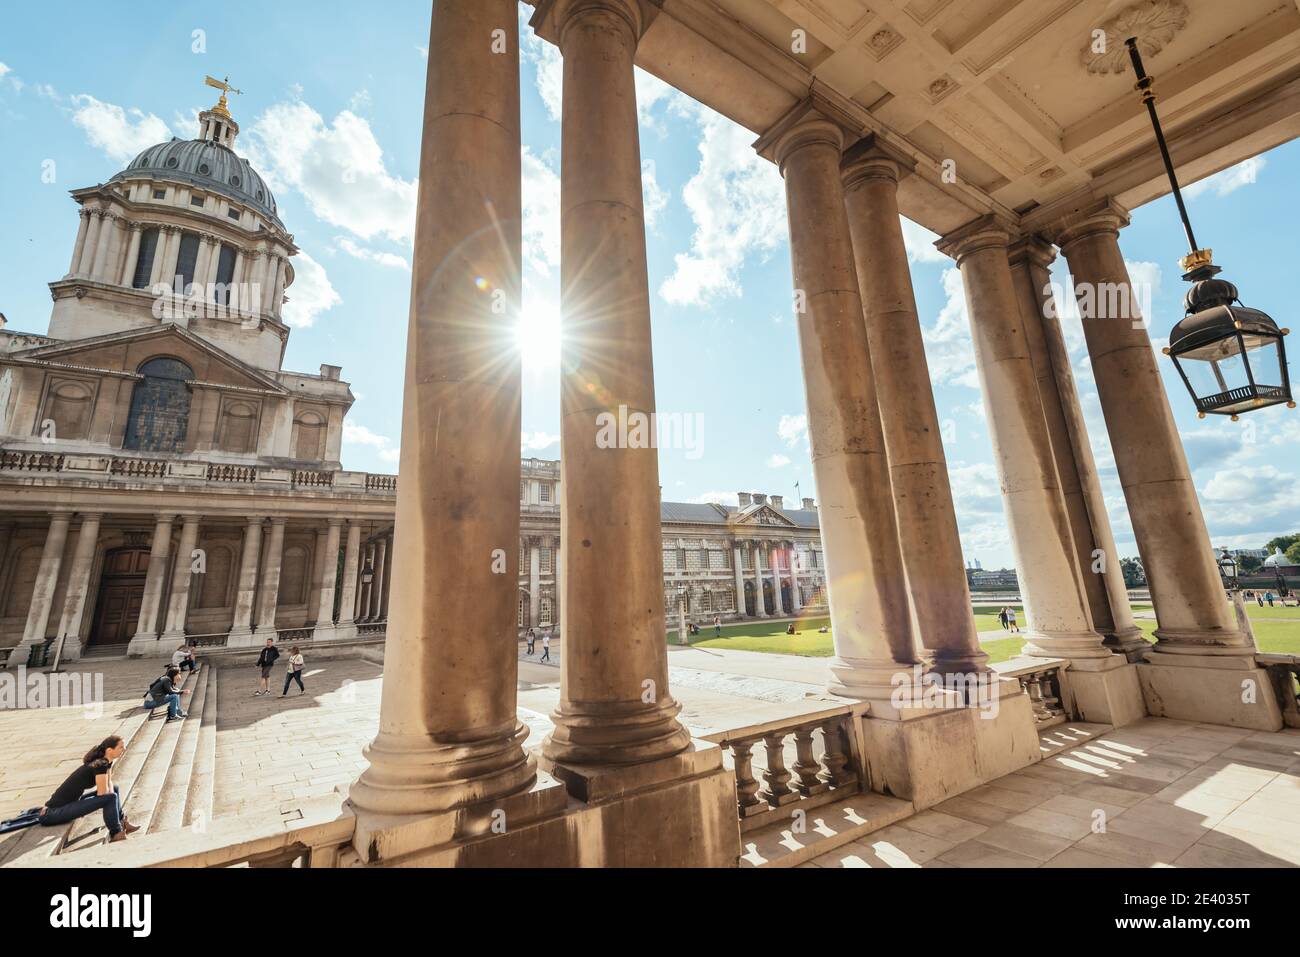 Old Royal Naval College, Greenwich, London, England, UK Stock Photo - Alamy